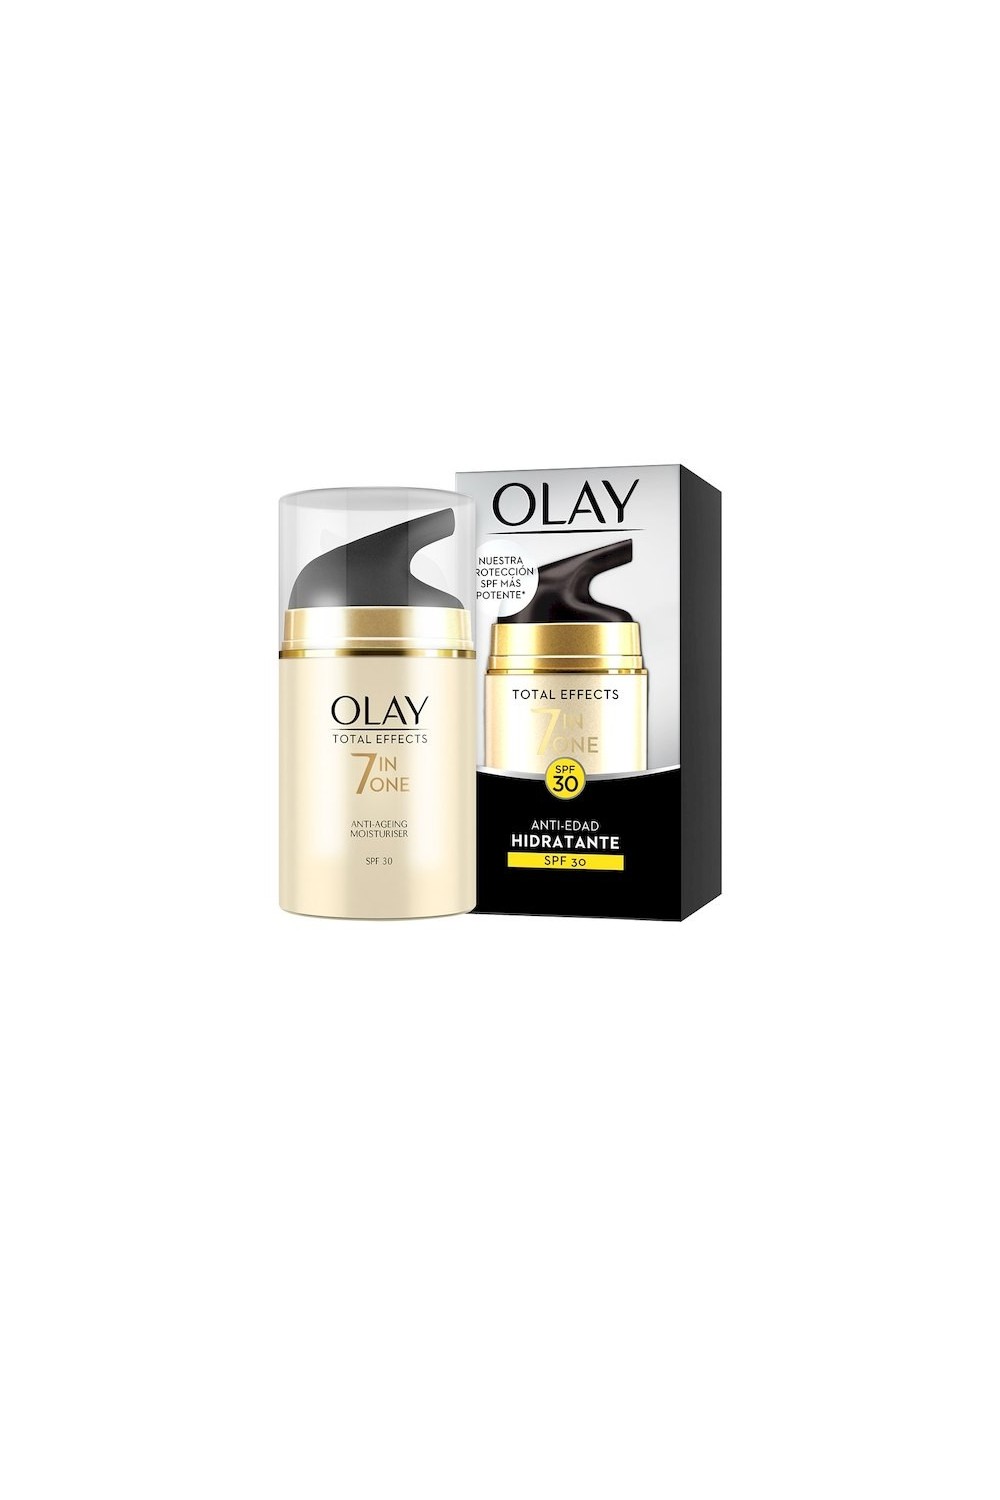 Olay Total Effects 7 en 1 Anti-Ageing Day Cream Spf30 50ml